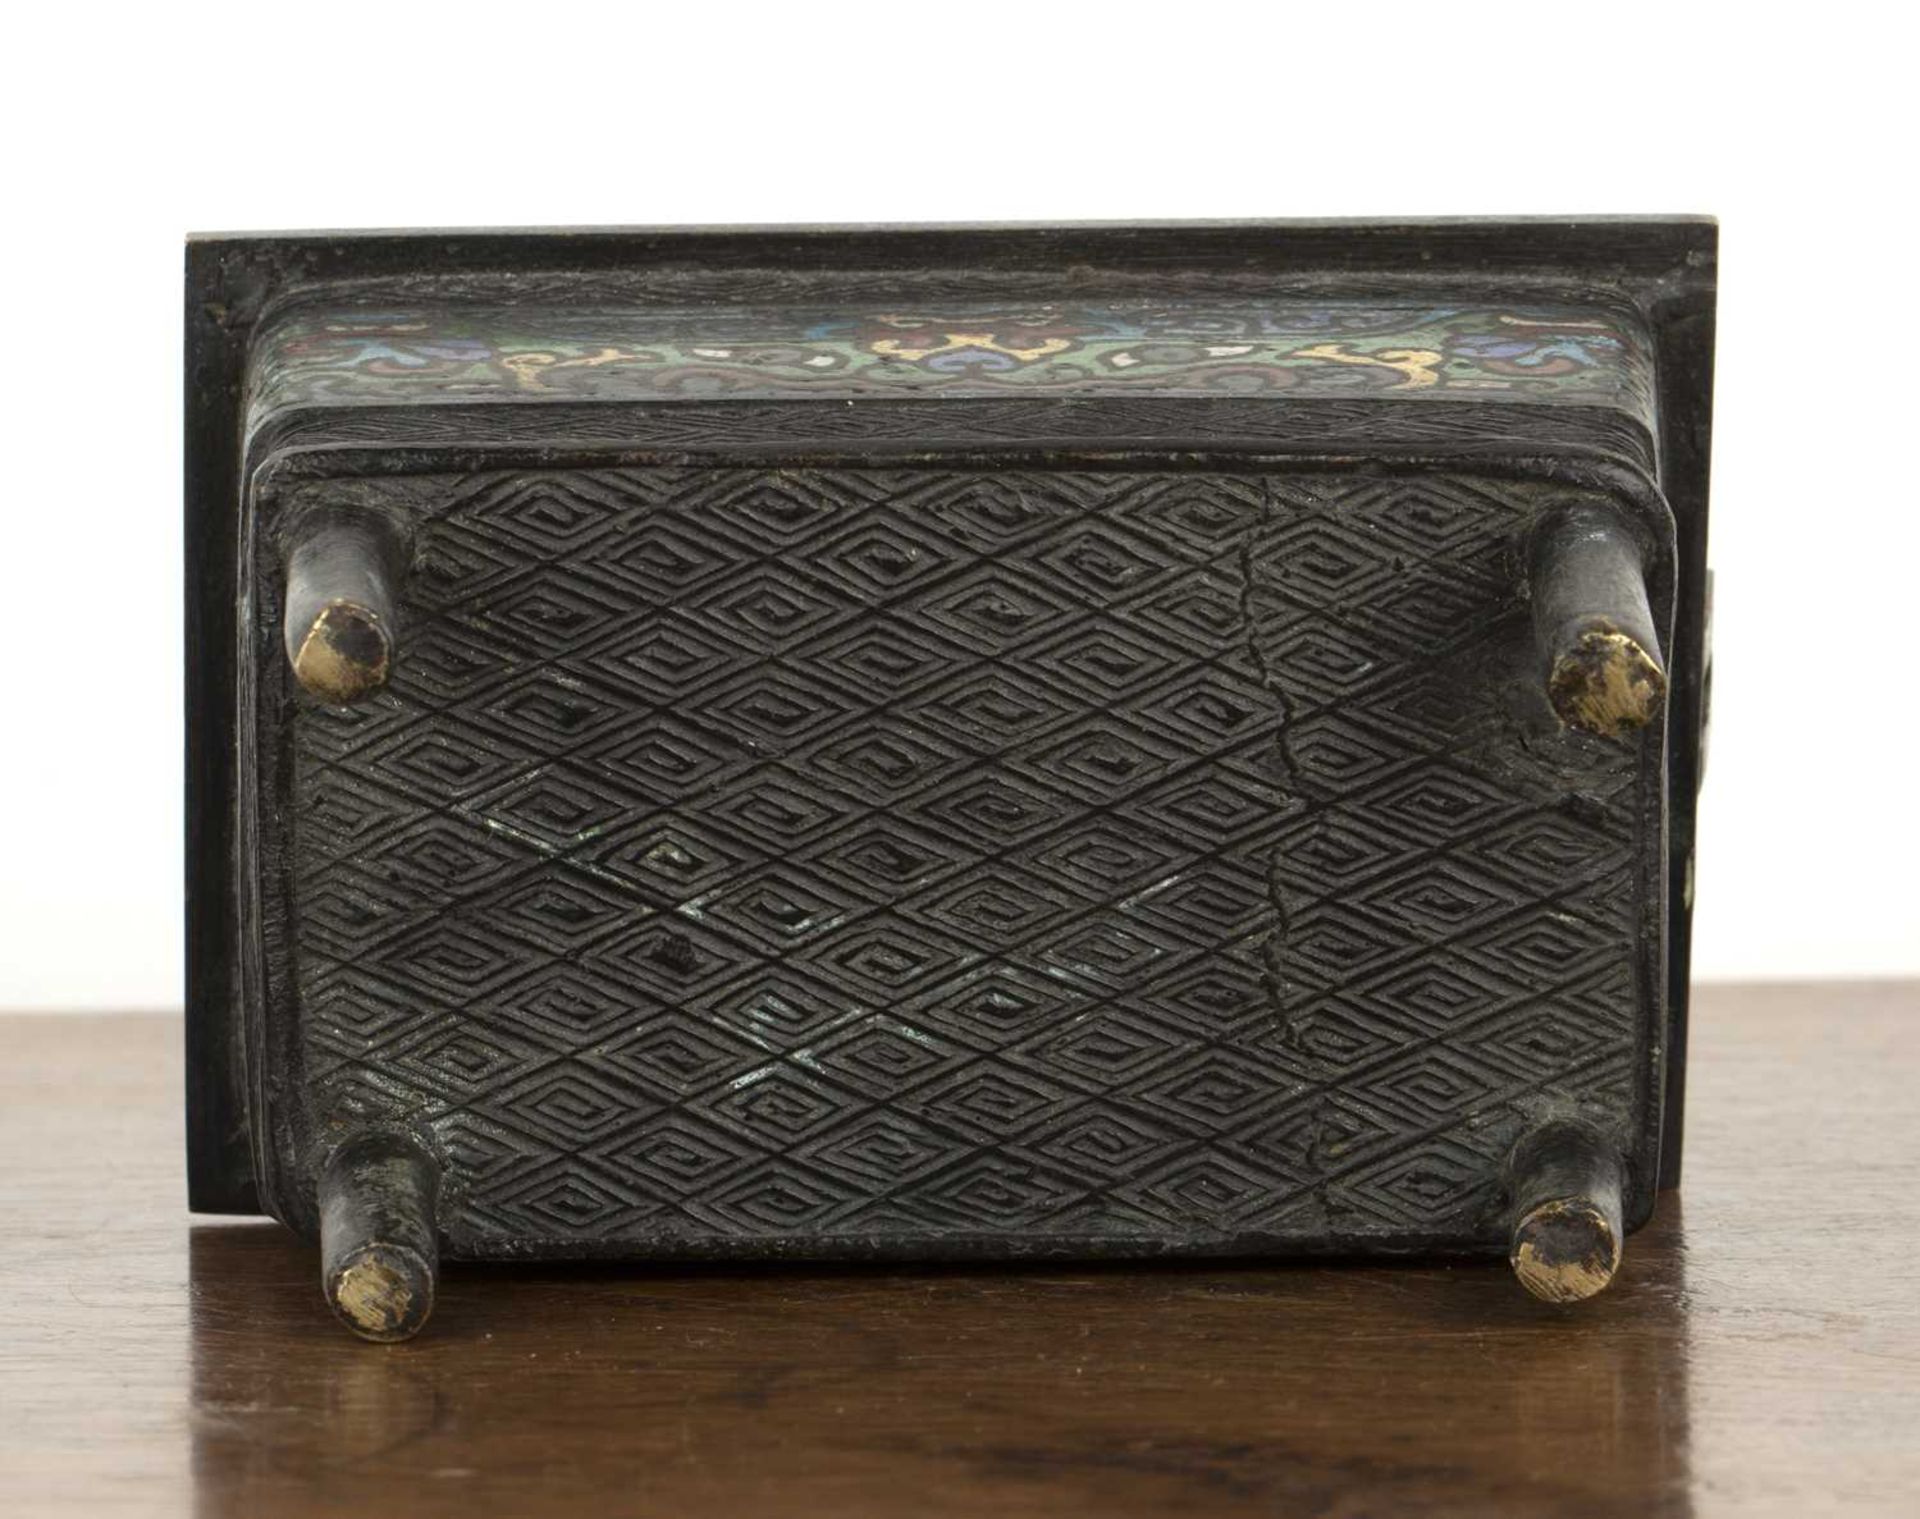 Small bronze censer Chinese of rectangular form with cloisonne panels, 13cm x 8.6cm x 11cm - Image 6 of 6